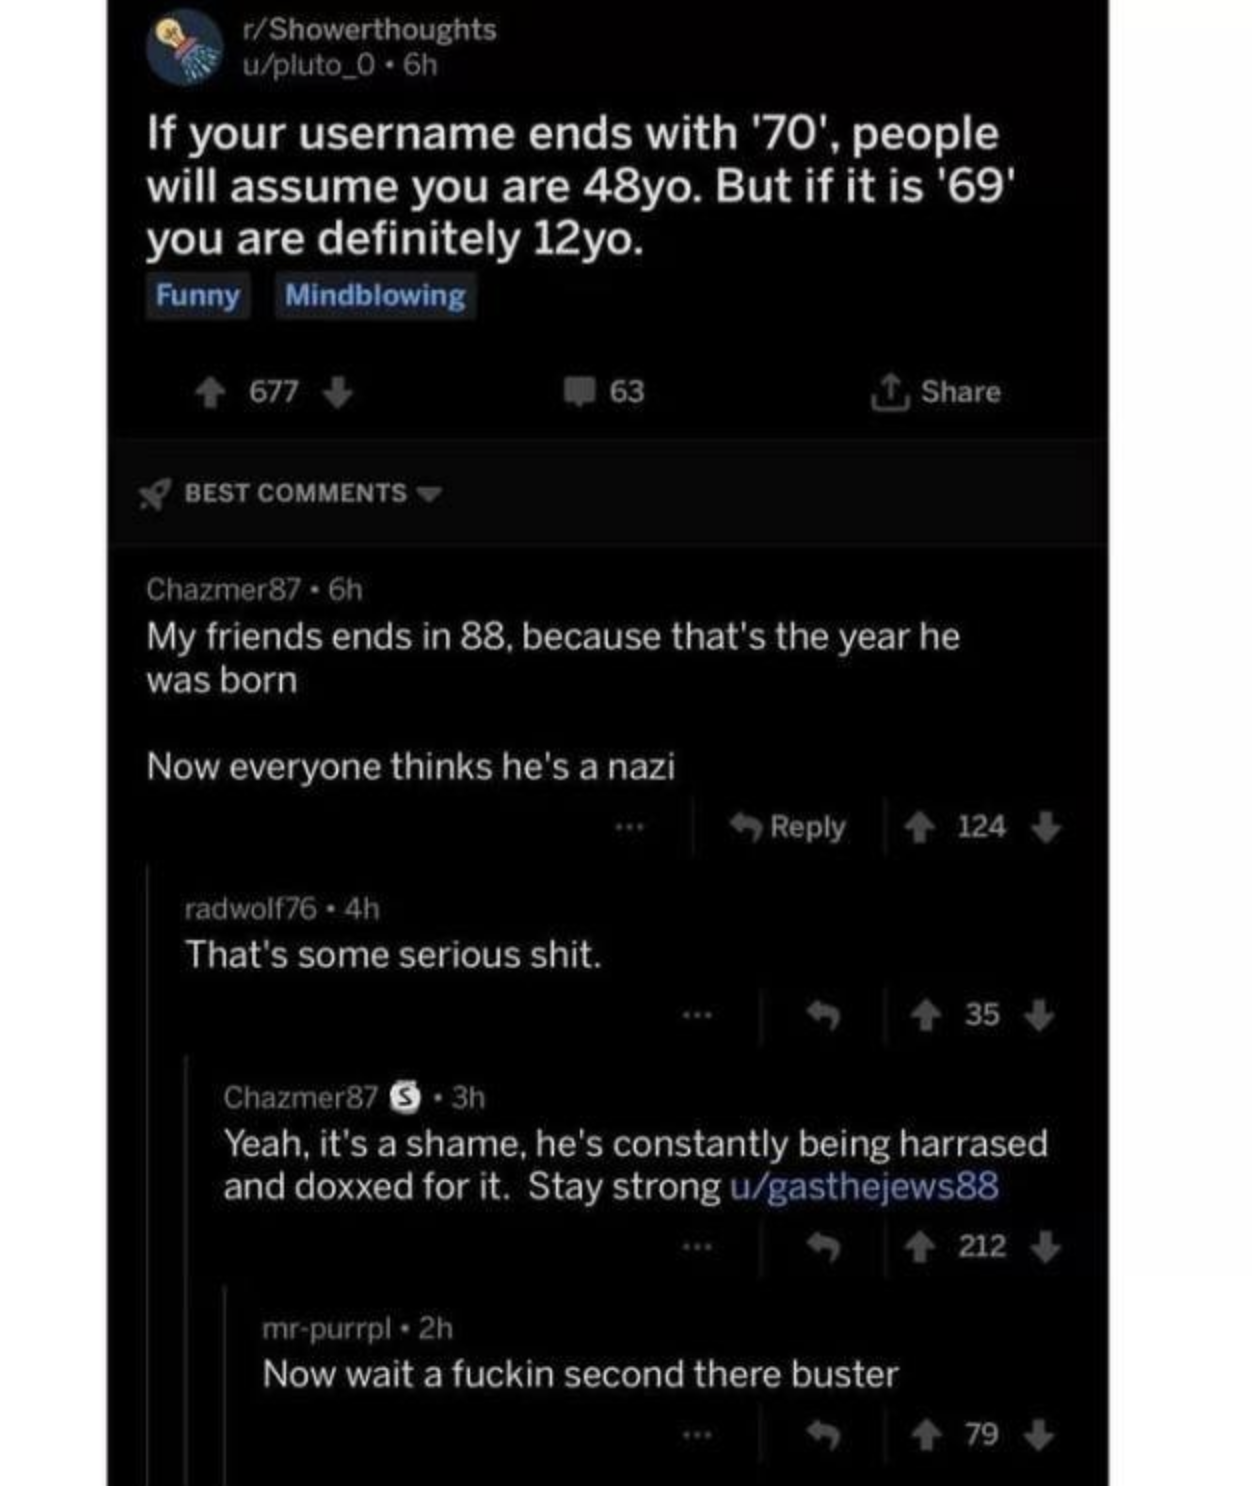 software - Showerthoughts upluto_0.6h If your username ends with '70', people will assume you are 48yo. But if it is '69' you are definitely 12yo. Funny Mindblowing 4 677 Best Chazmer87.6h My friends ends in 88, because that's the year he was born Now eve